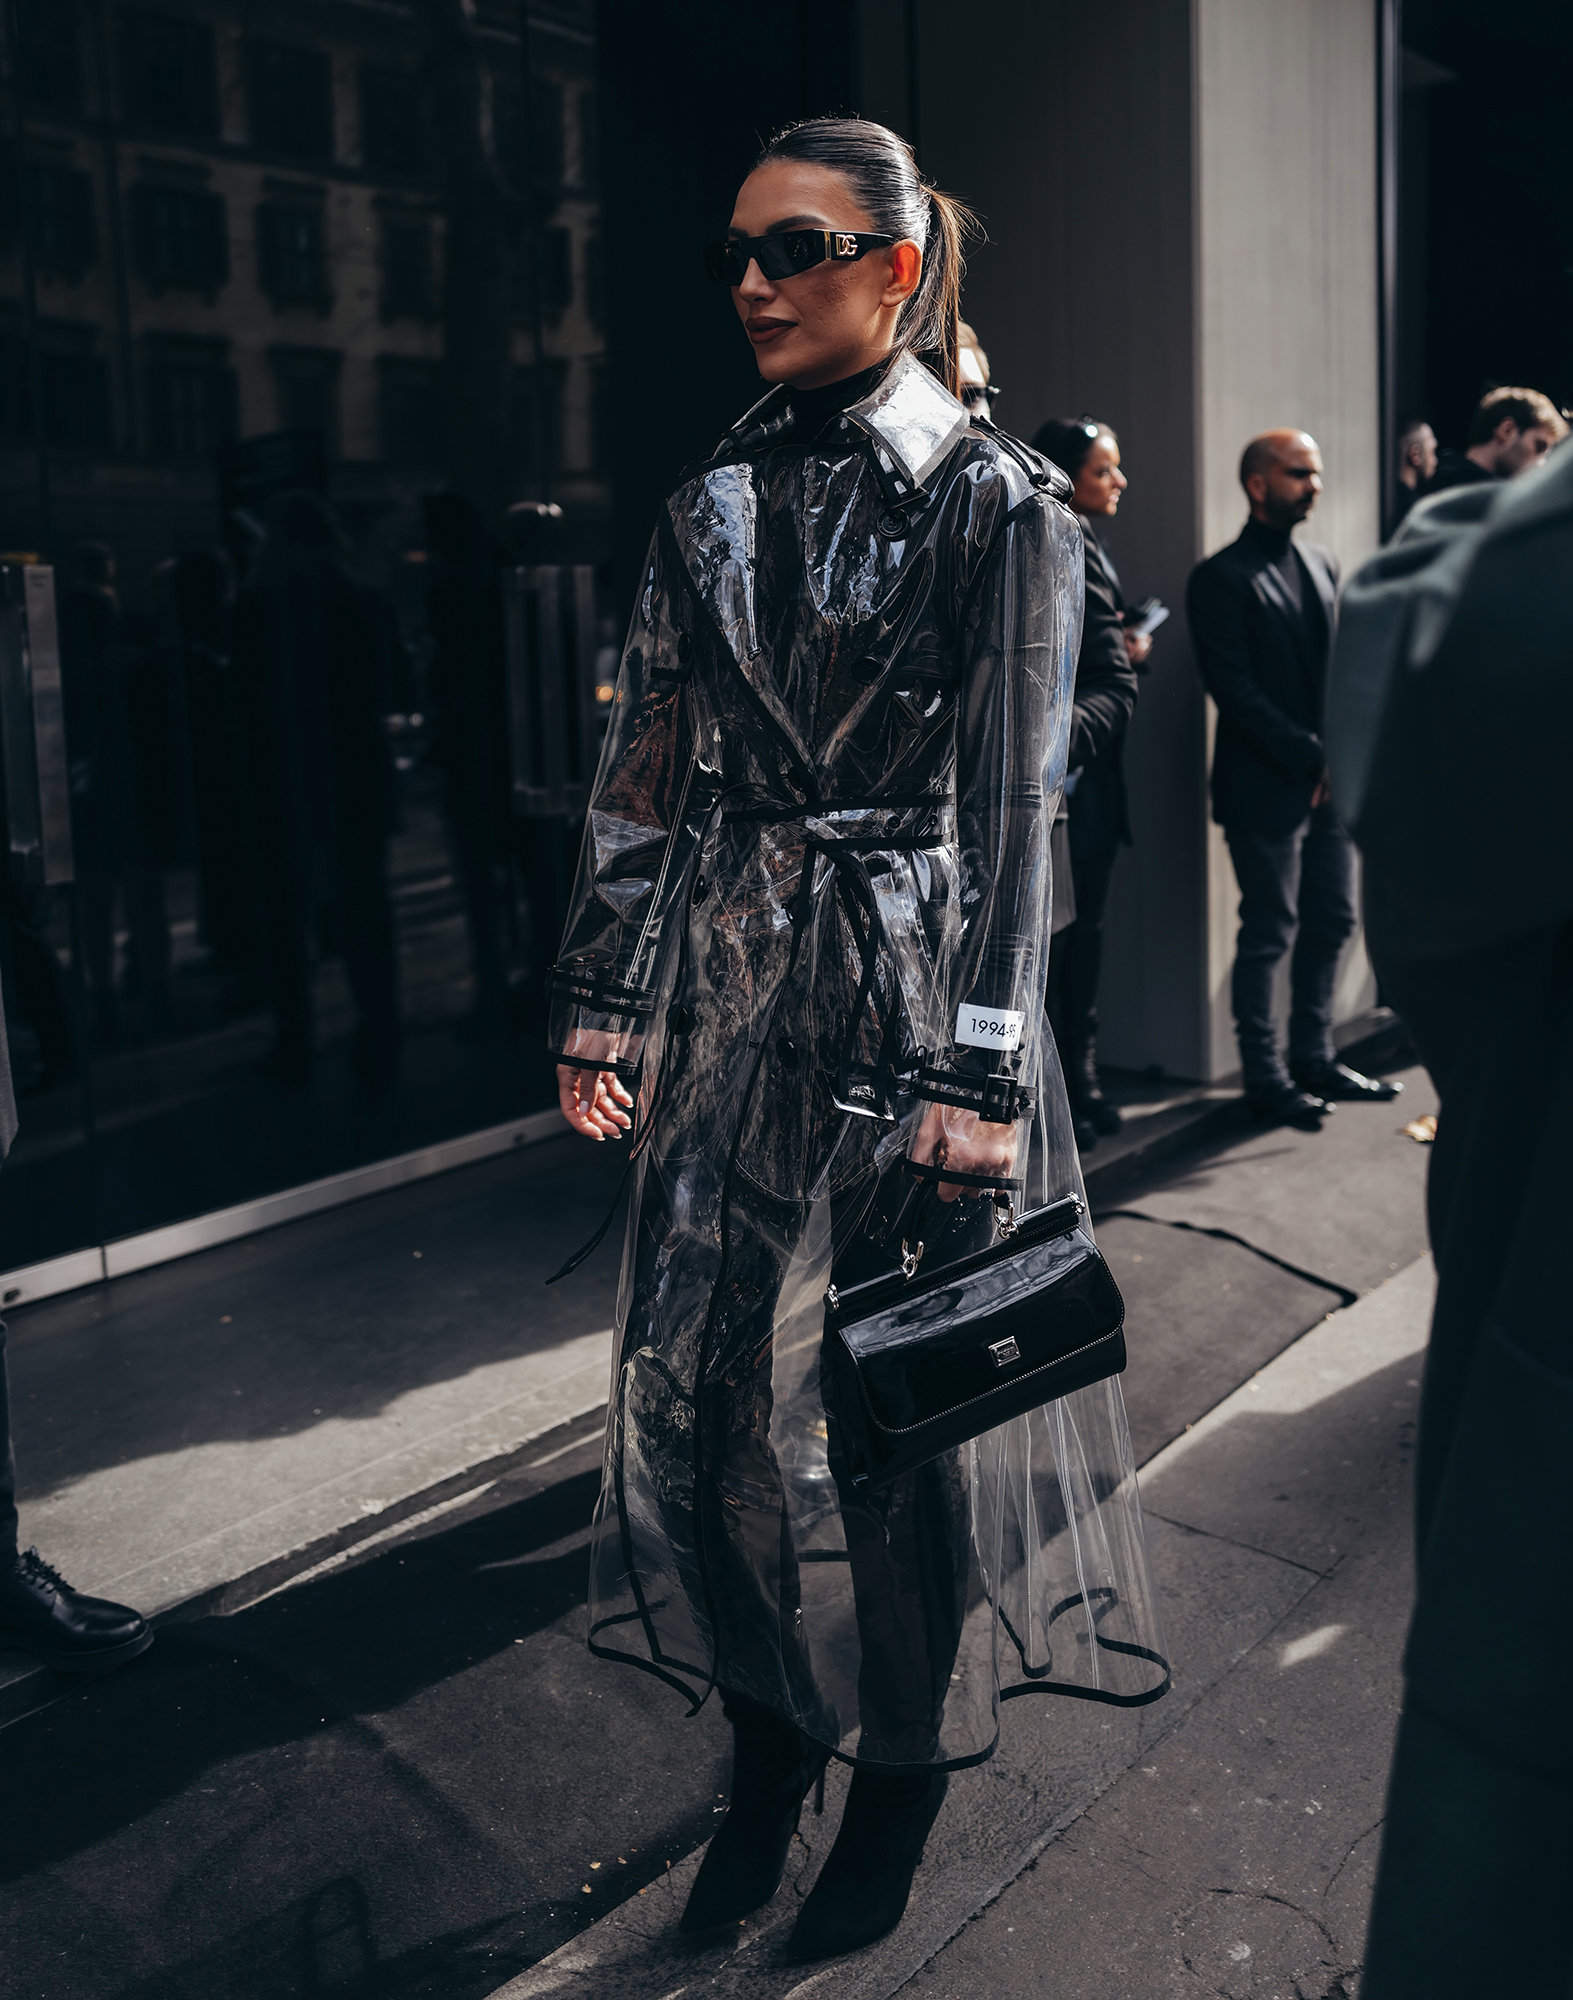 dolce gabbana milan fashion week february 2023 photos - Dalicam - Street  Style, Commercial and Event Photographer from Poland